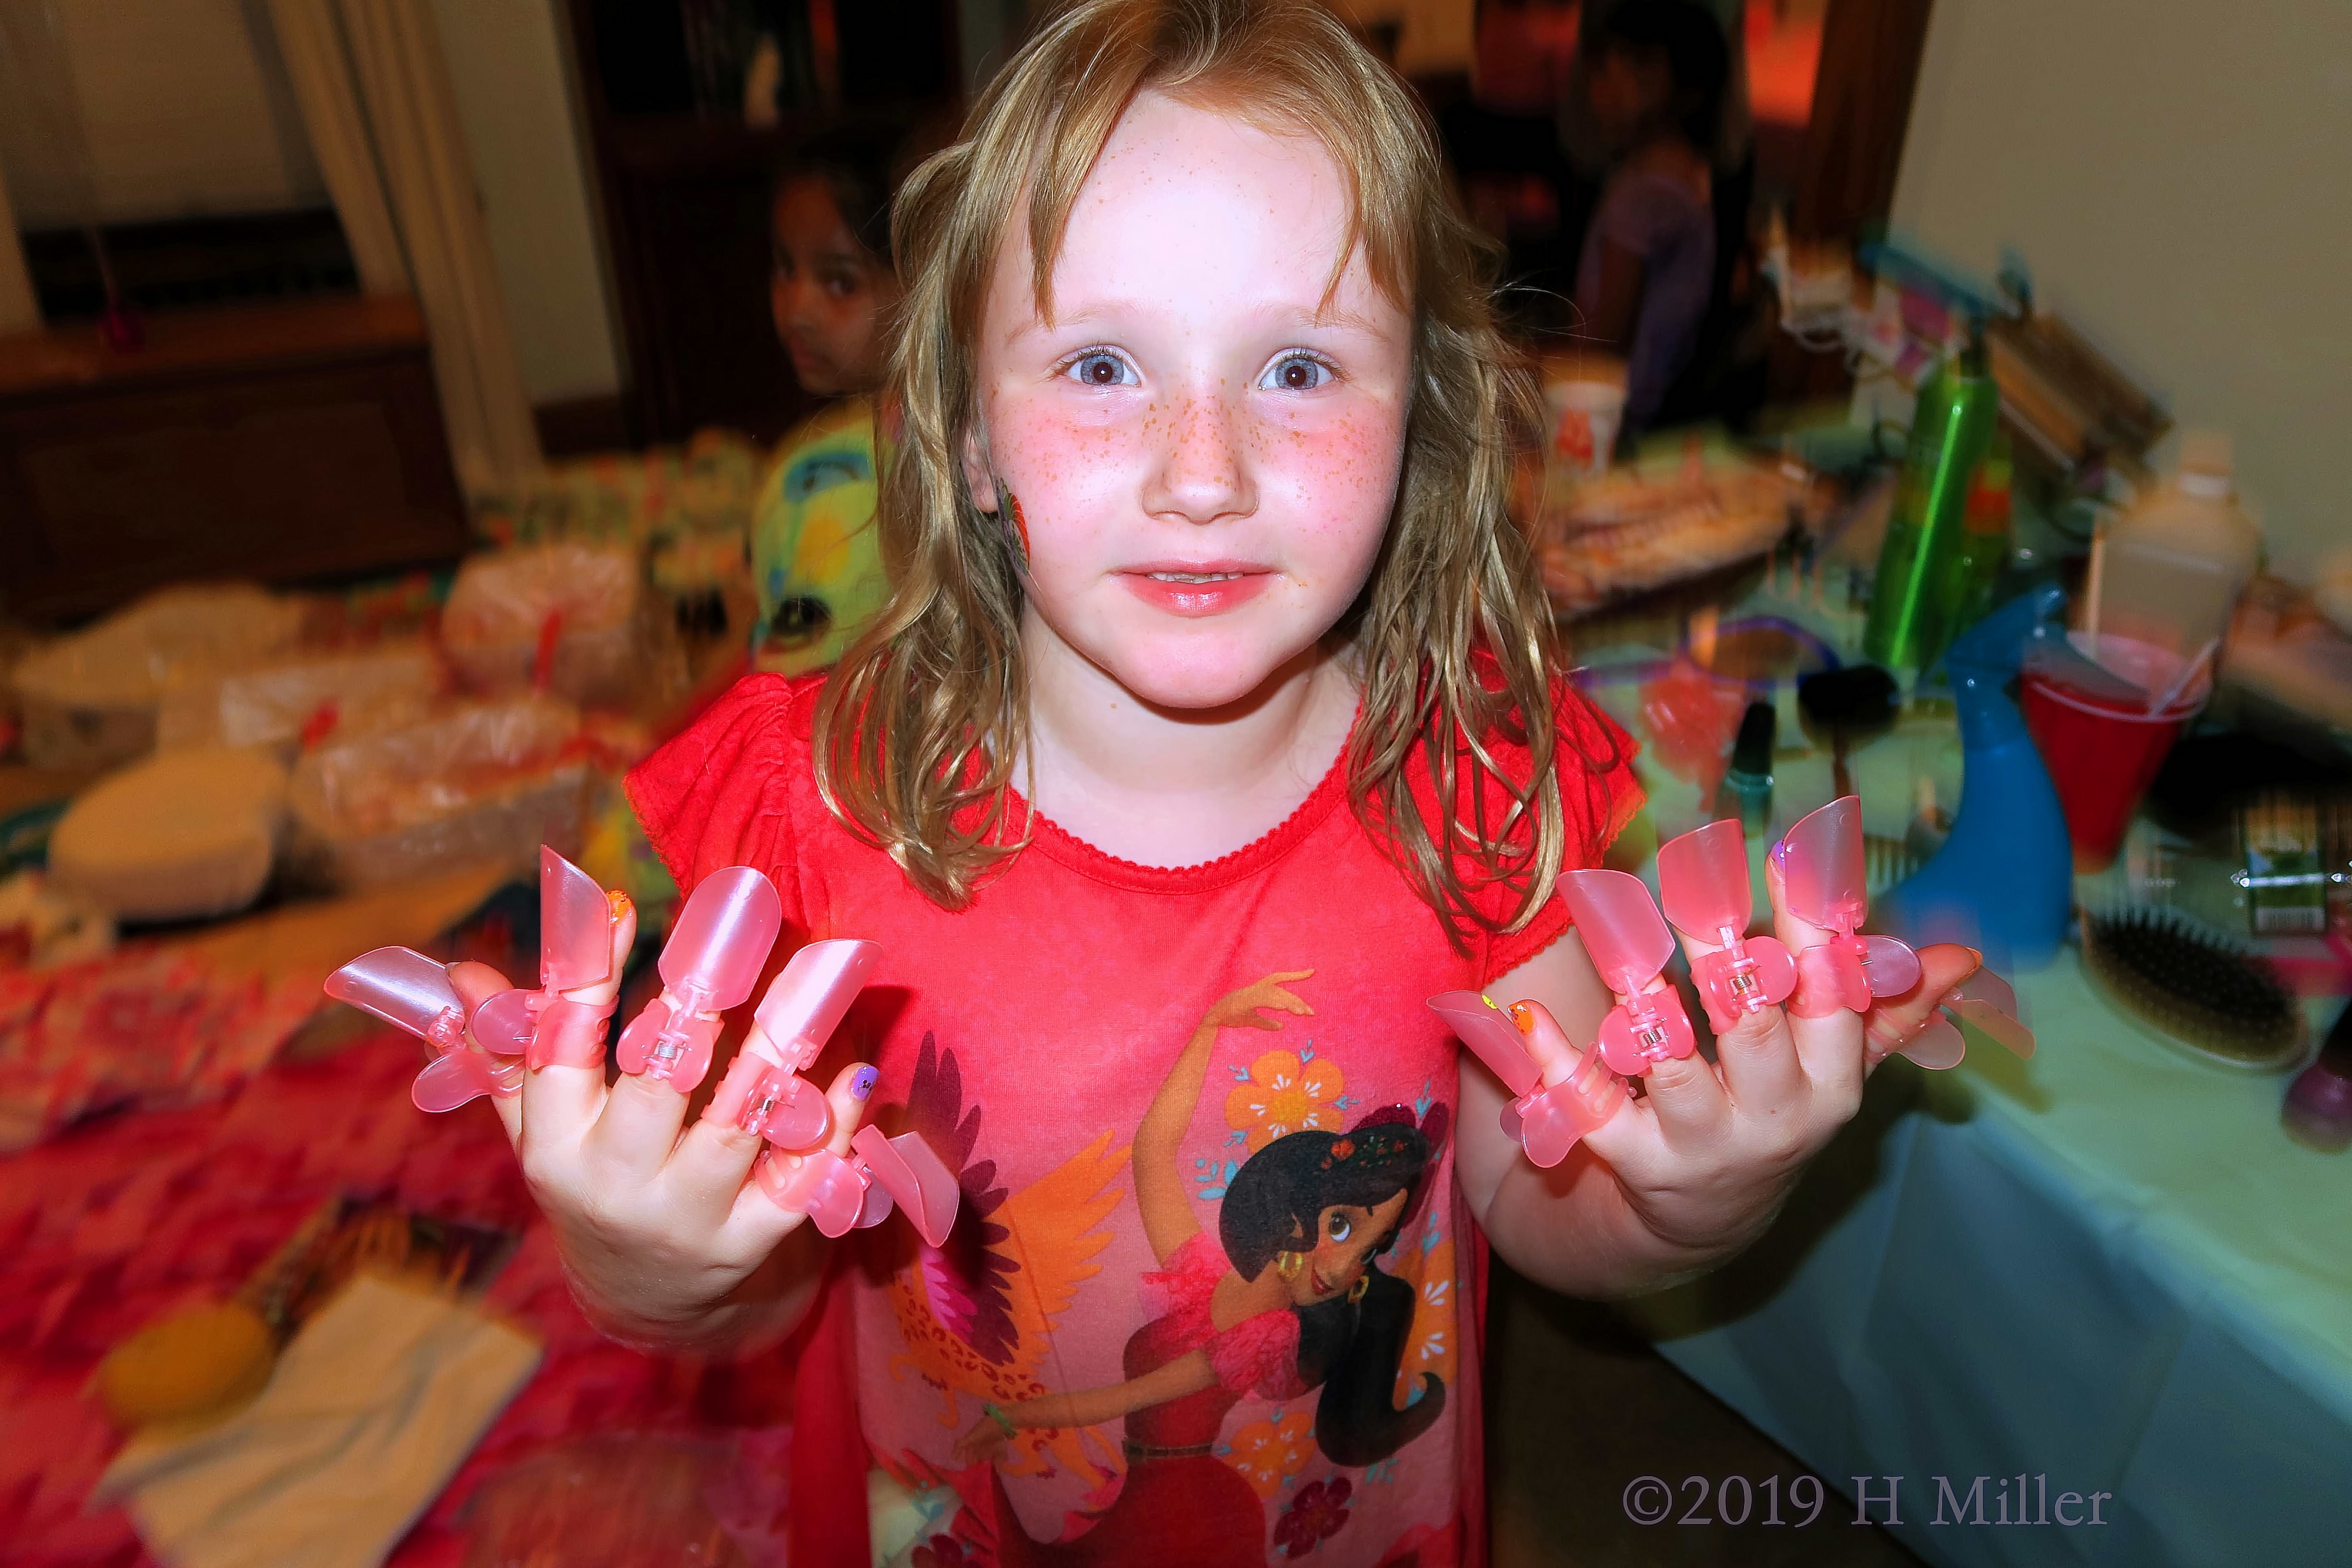 Kids Manicure Fun! Spa Party Guest Poses With Kids Mani! 4